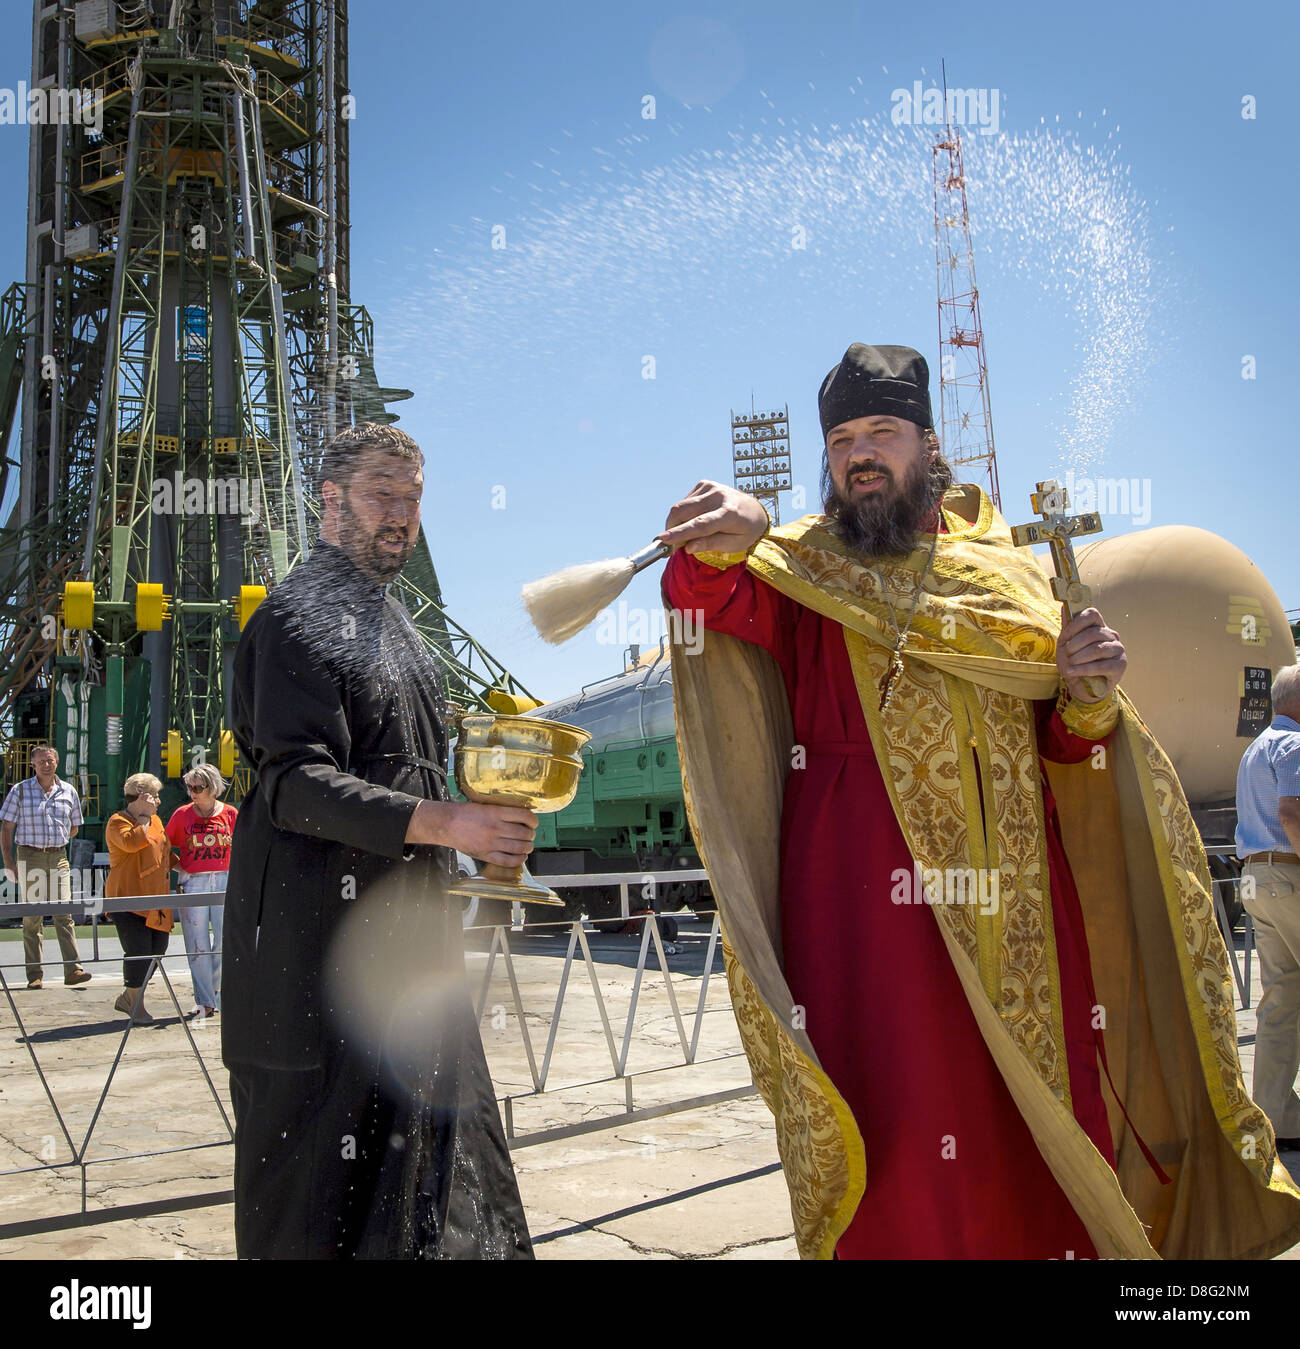 A Russian Orthodox Priest blesses members of the media shortly after having blessed the Soyuz rocket at the Baikonur Cosmodrome Launch pad May 27, 2013 in Kazakhstan. The launch of the Soyuz rocket to the International Space Station with Expedition 36/37 crew is scheduled for Wednesday. Stock Photo